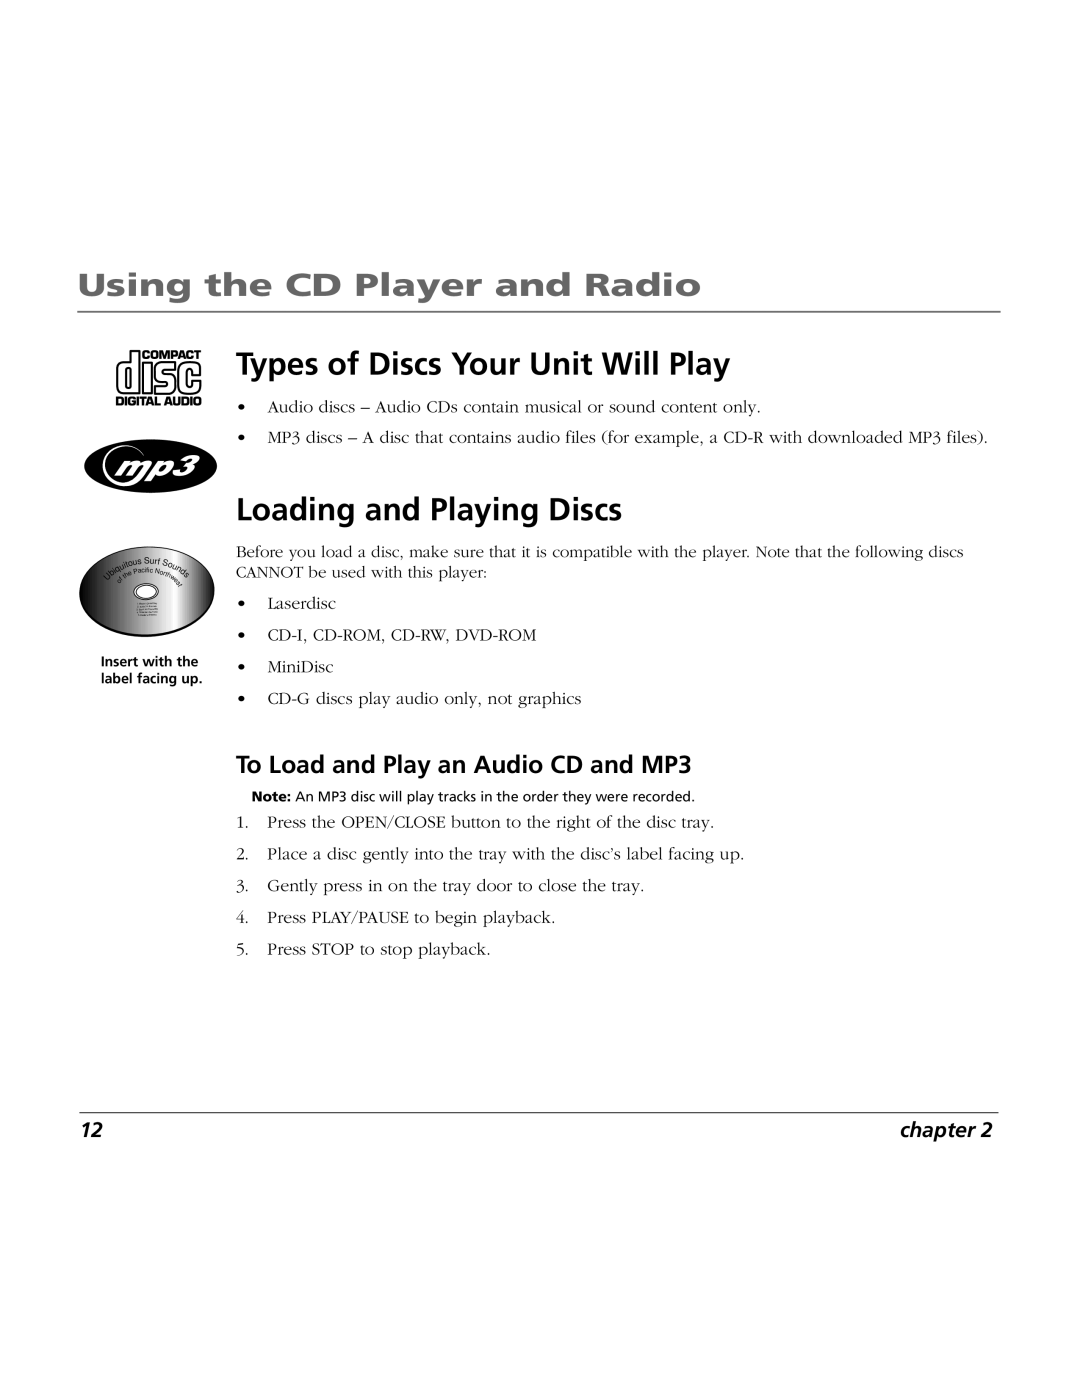 RCA TV/Radio/CD Player Using the CD Player and Radio, Types of Discs Your Unit Will Play, Loading and Playing Discs 